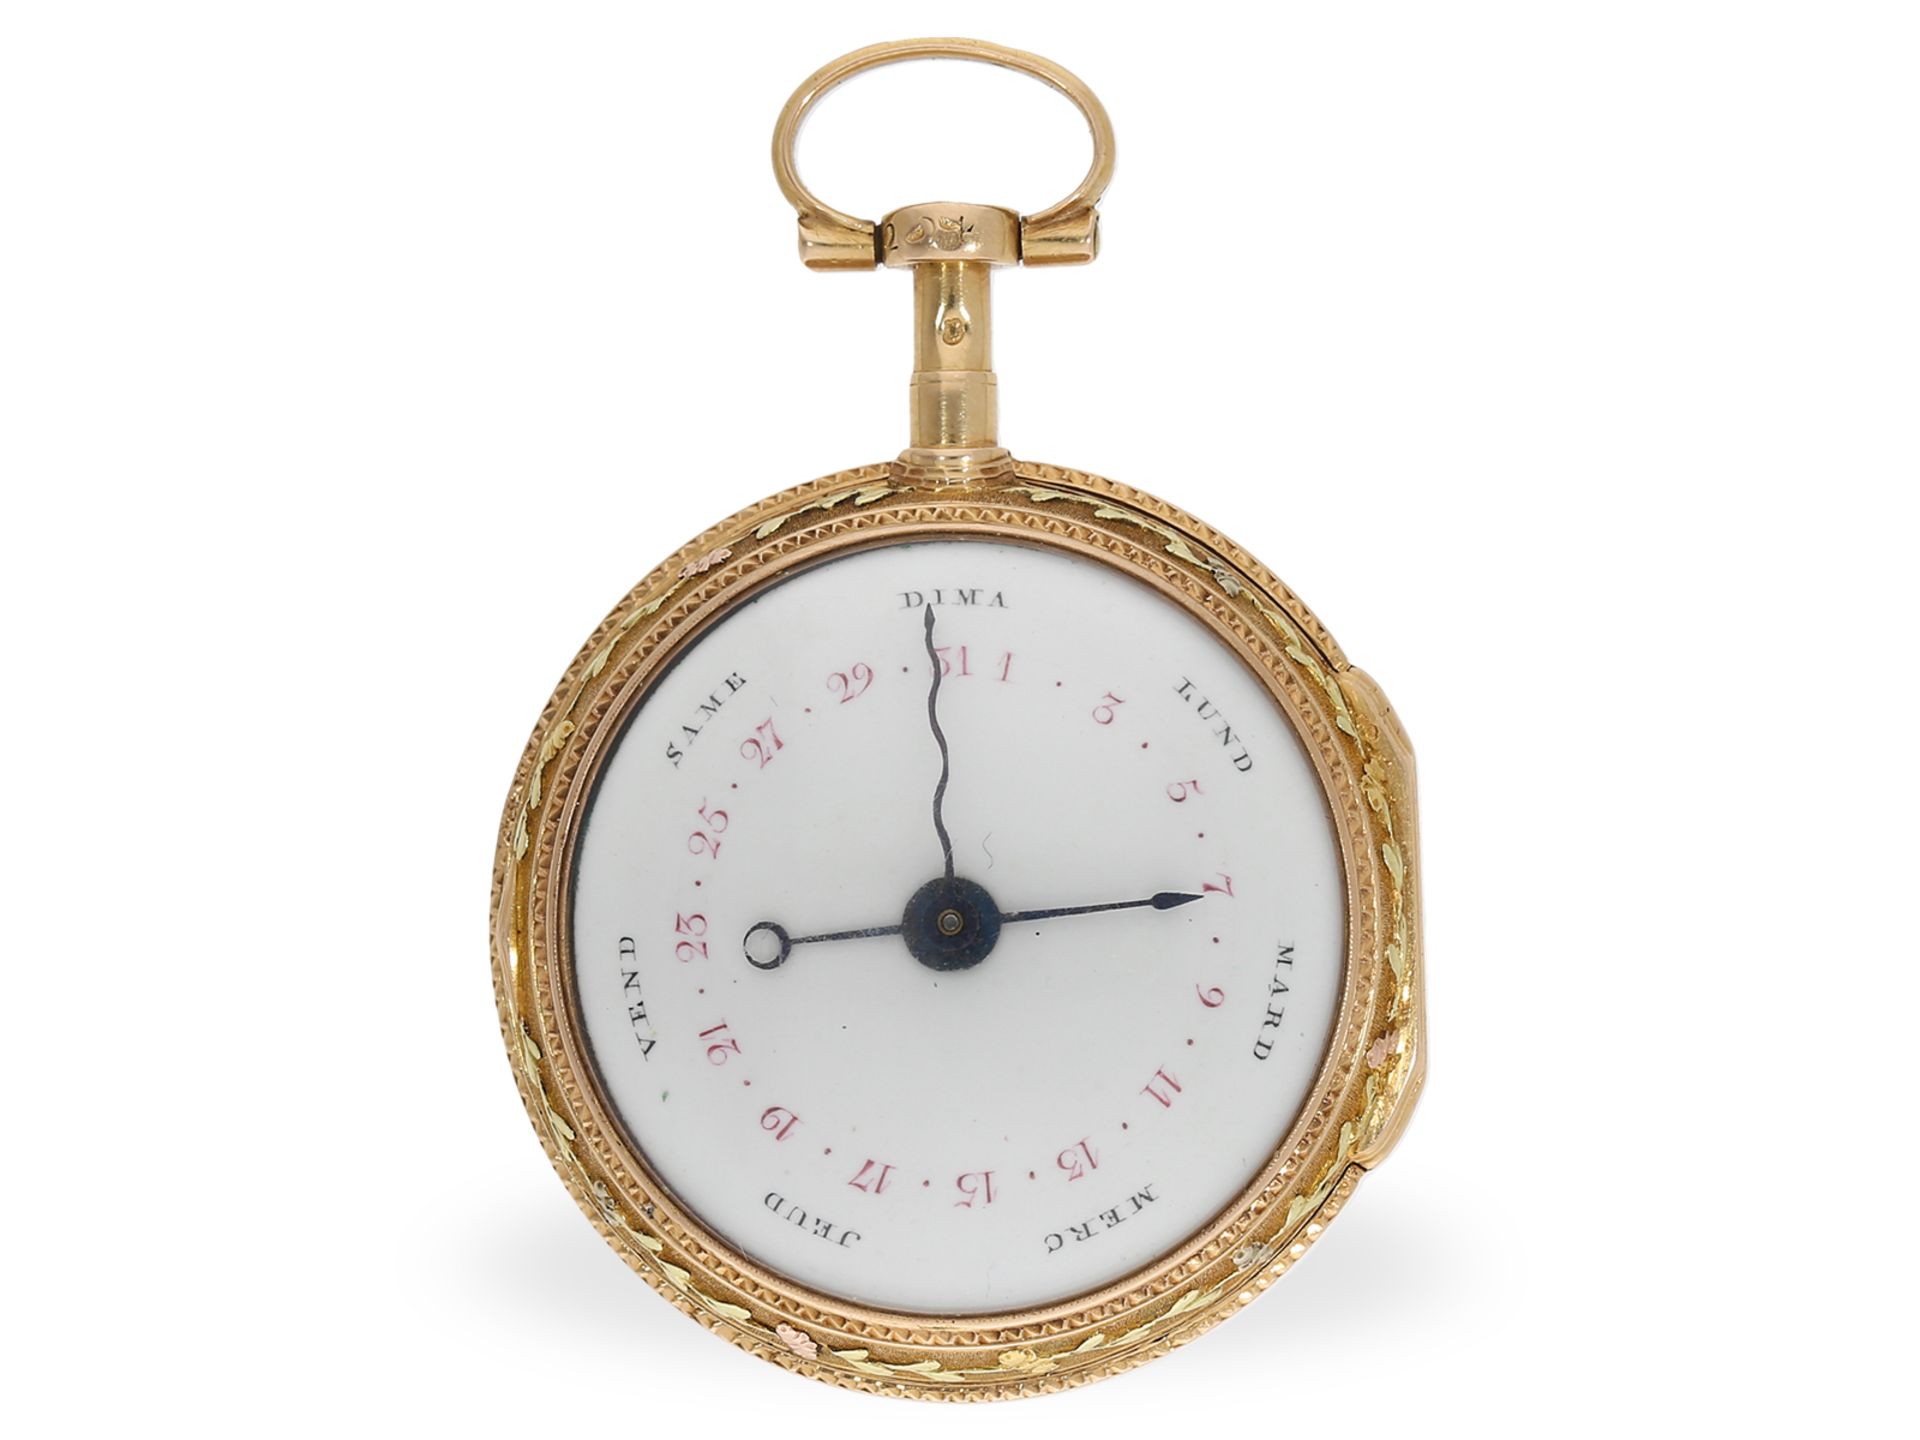 Pocket watch: rarity, double-sided verge watch with enamel painting and rare calendar, ca. 1760 - Image 2 of 2